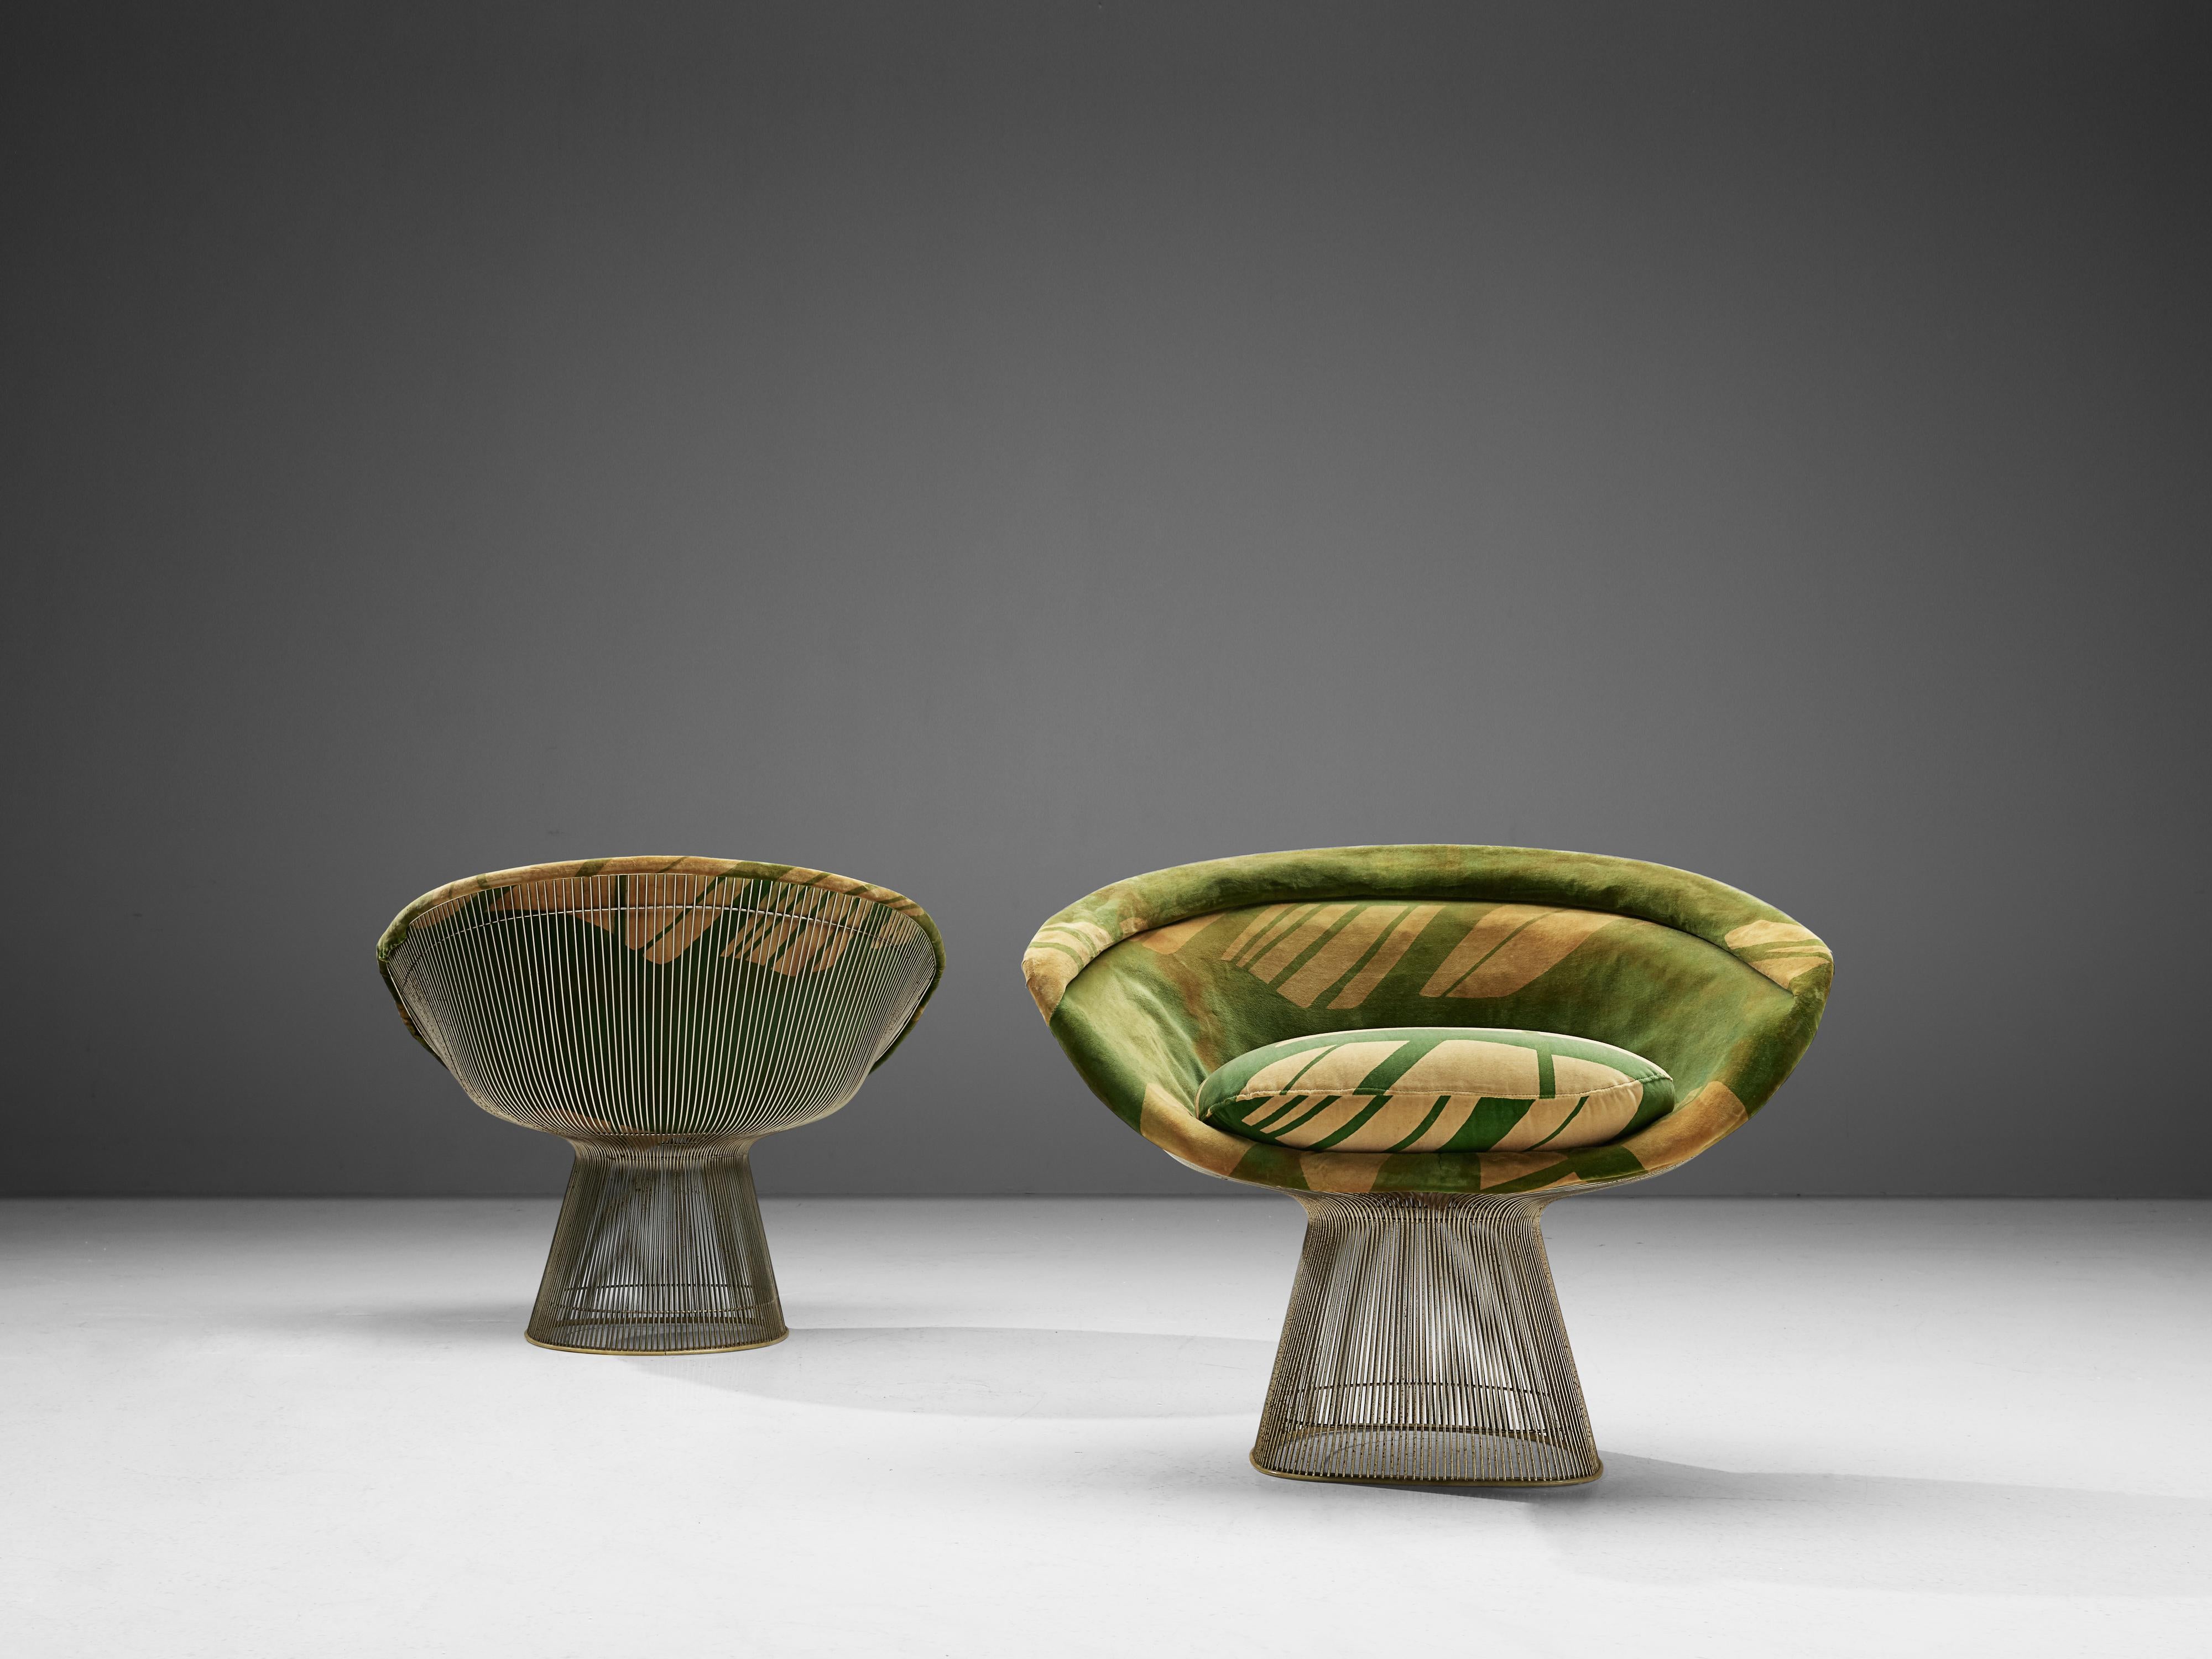 Warren Platner, set of two lounge chairs, metal and yellow-green fabric, United States, 1966. 

This iconic set by Warren Platner (1919-2006) is created by welding curved steel rods to circular and semi-circular frames, simultaneously serving as